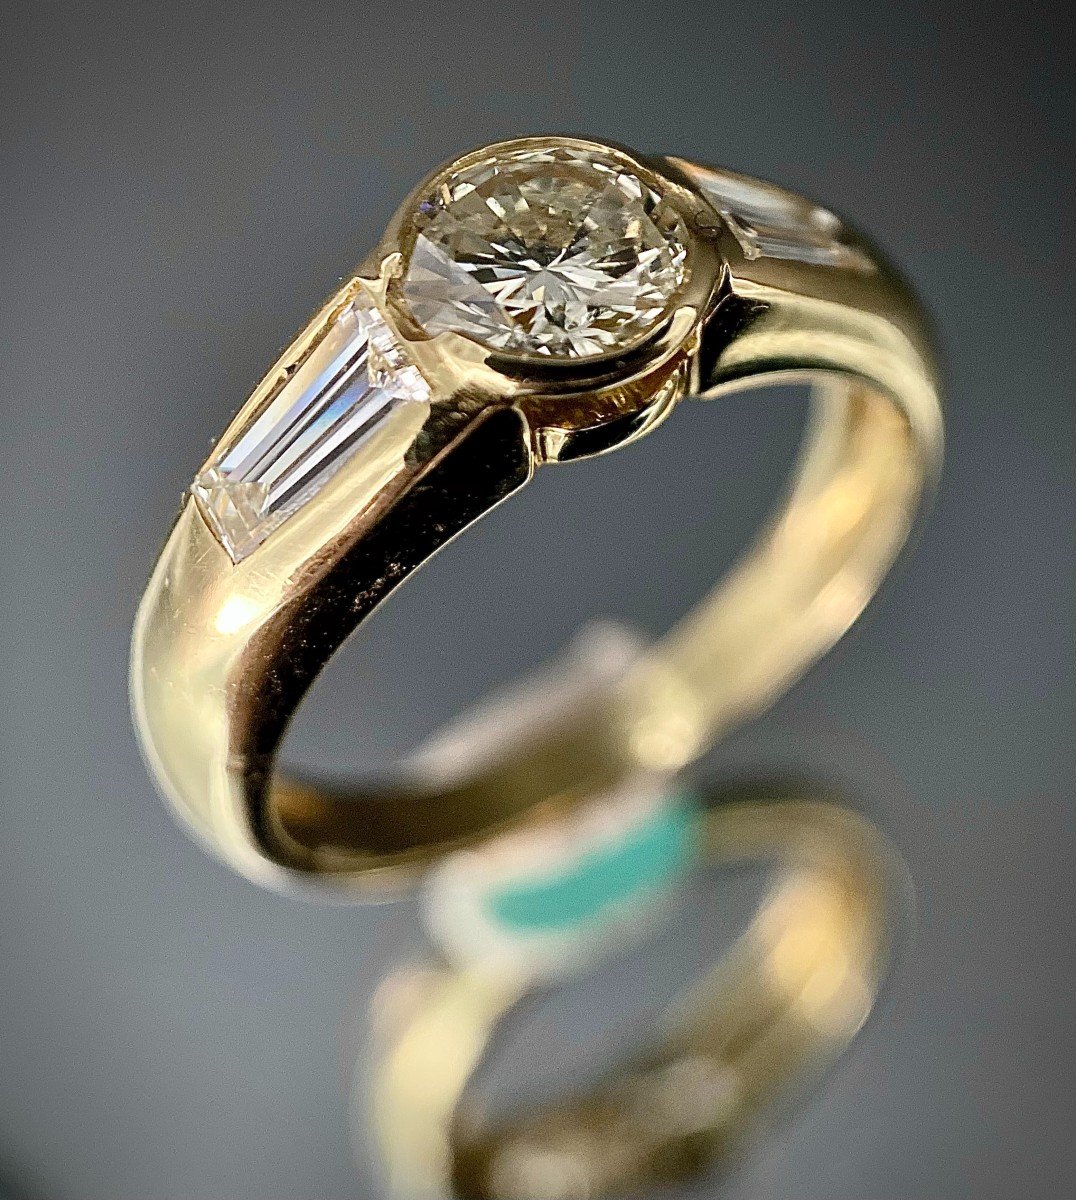 18k Yellow Gold Ring With 1 Diamond Of 0.55 Carat And 2 Baguettes 0.50 Carat